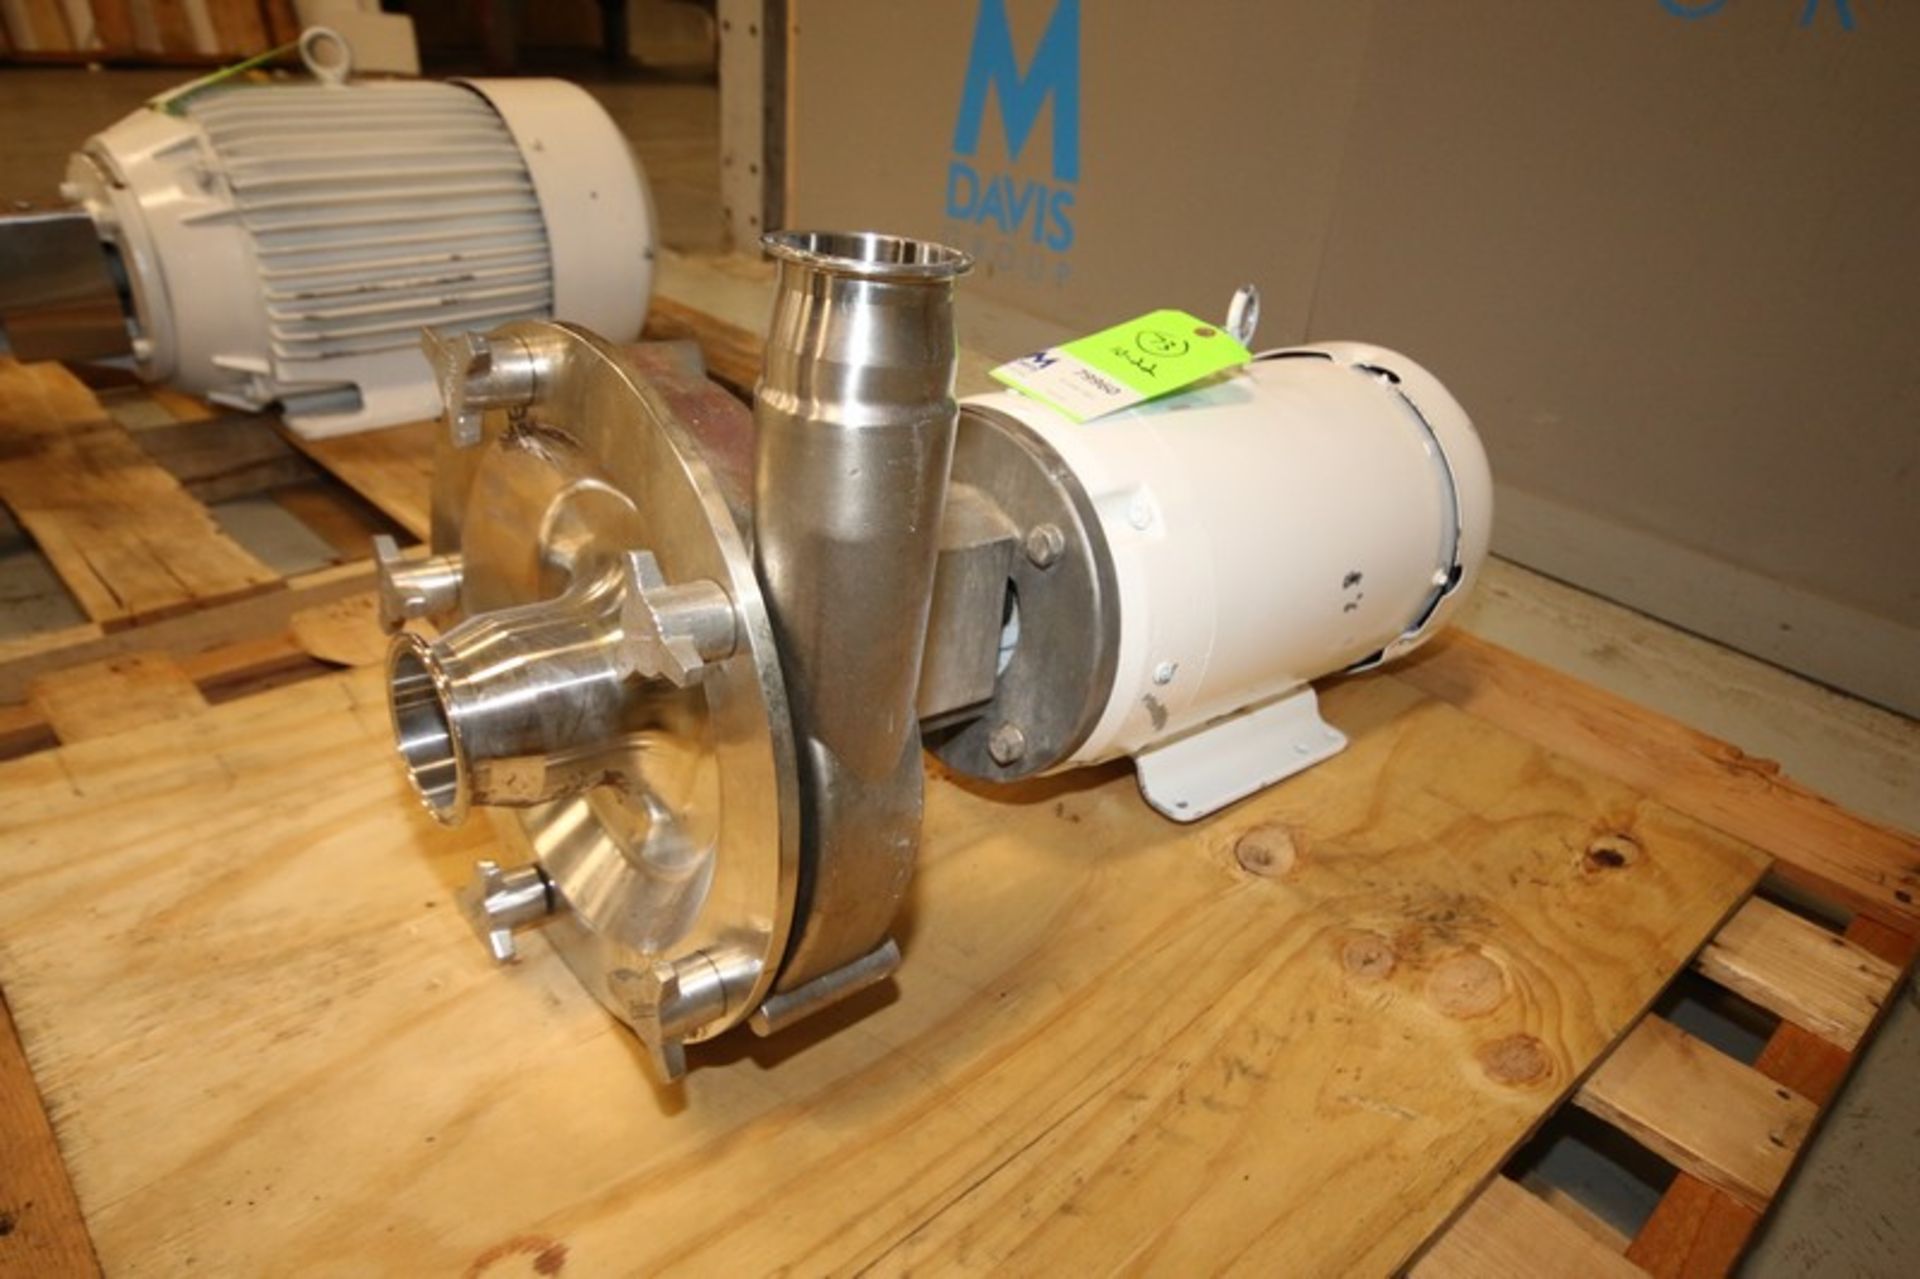 Fristam 10 hp Centrifugal Pump, Model FPX3551-220, with 3" x 2.5" CT S/S Head, Baldor 1170 rpm